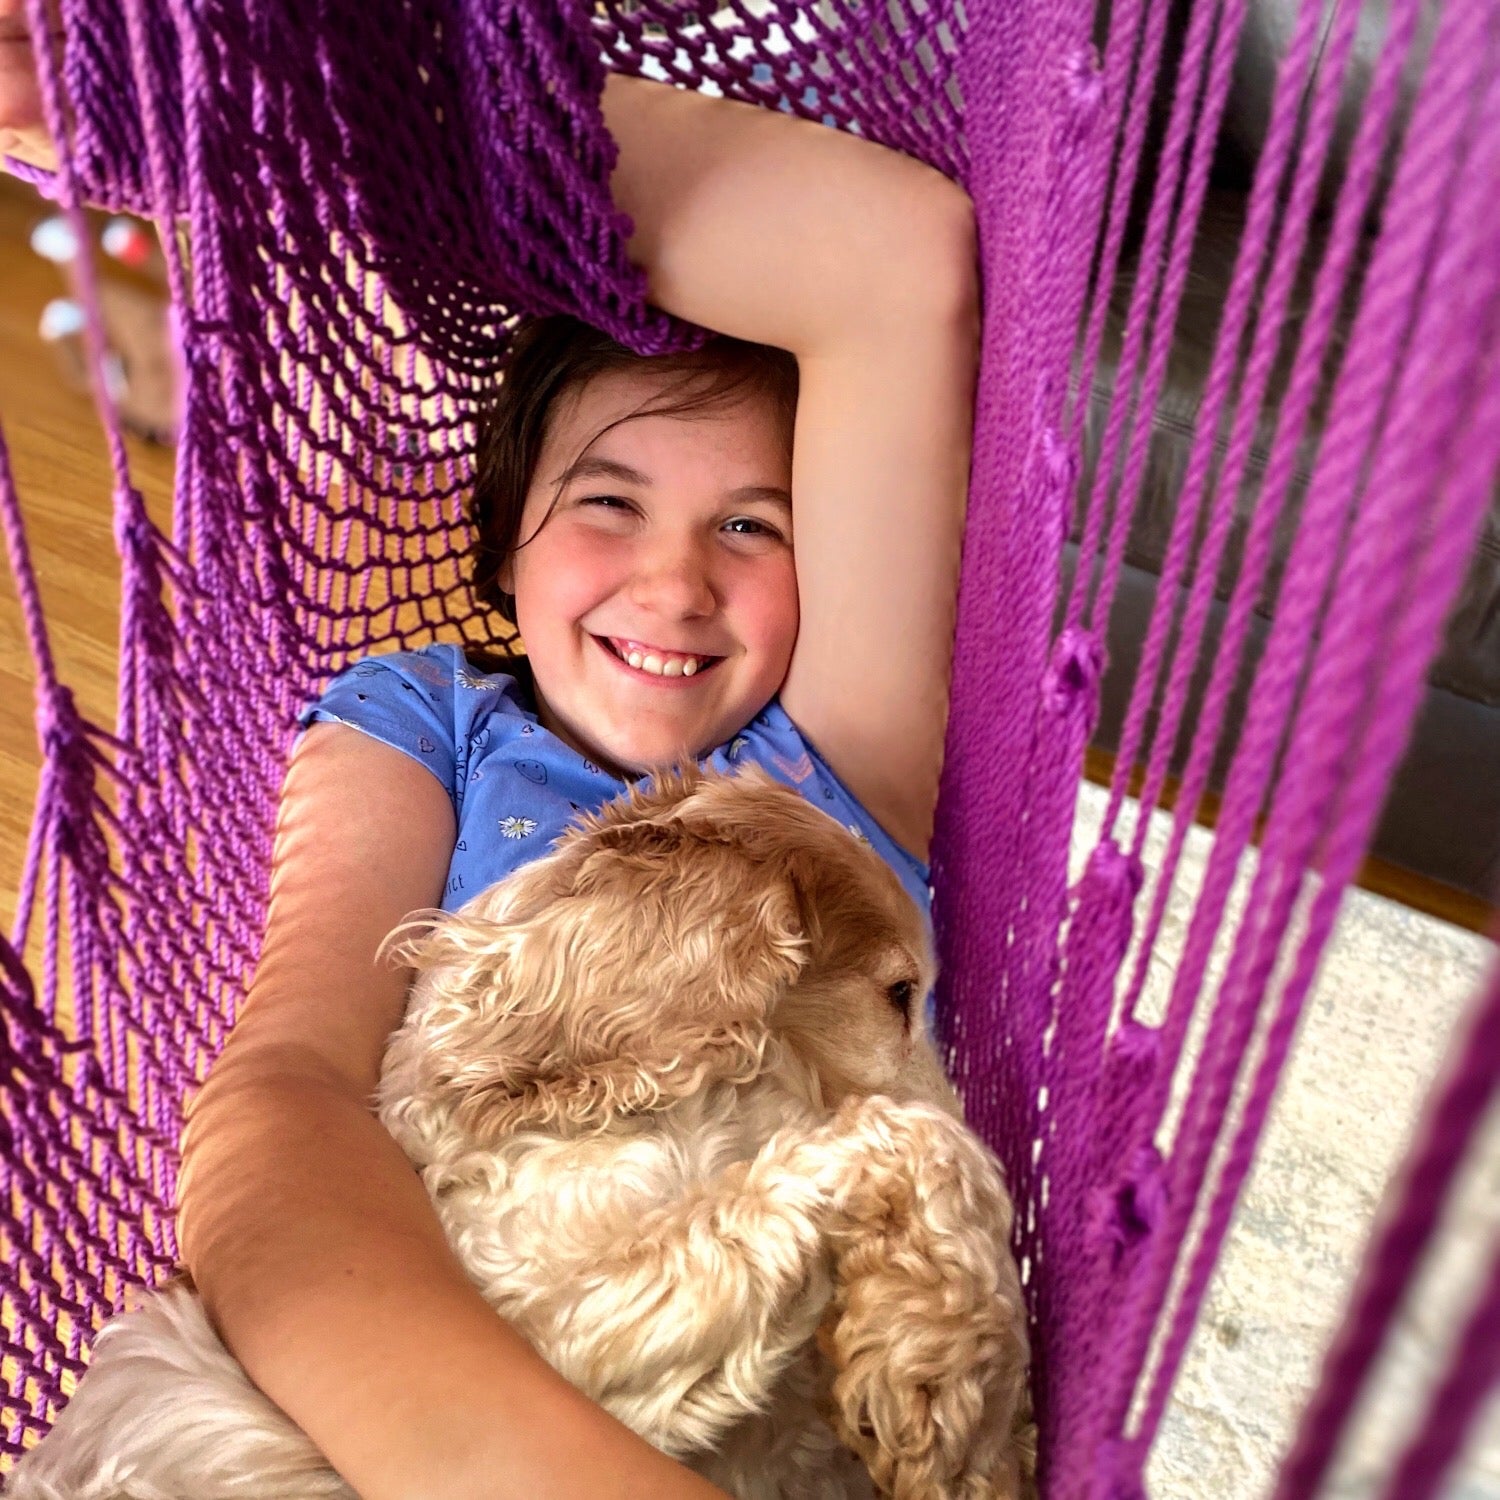 A happy girl is playing in a purple hammock swing with her dog.